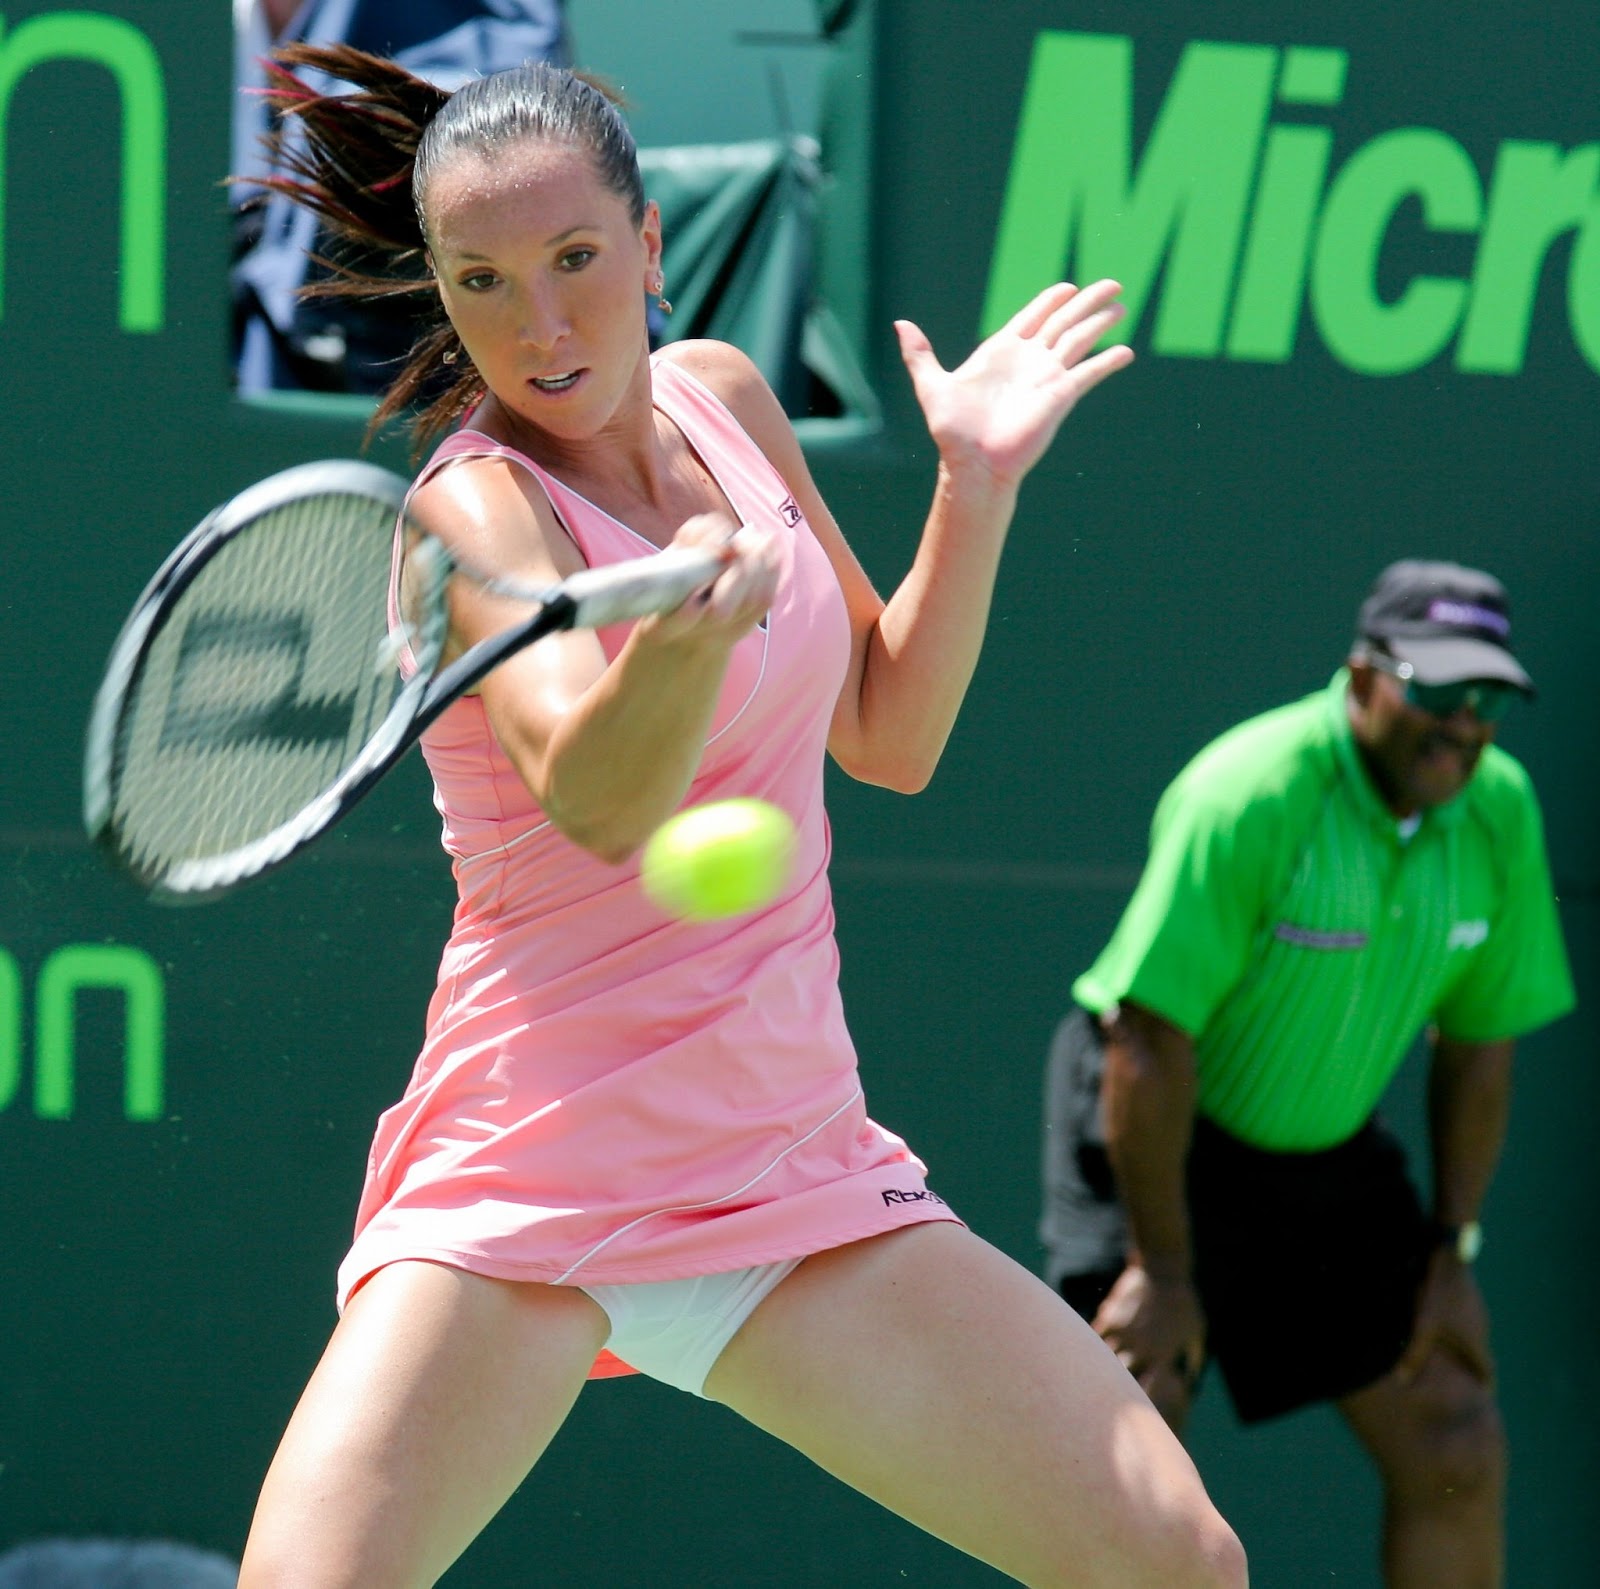 Jelena Jankovic Tennis Player Profile And Latest Pictures 2013 All Tennis Players Hd